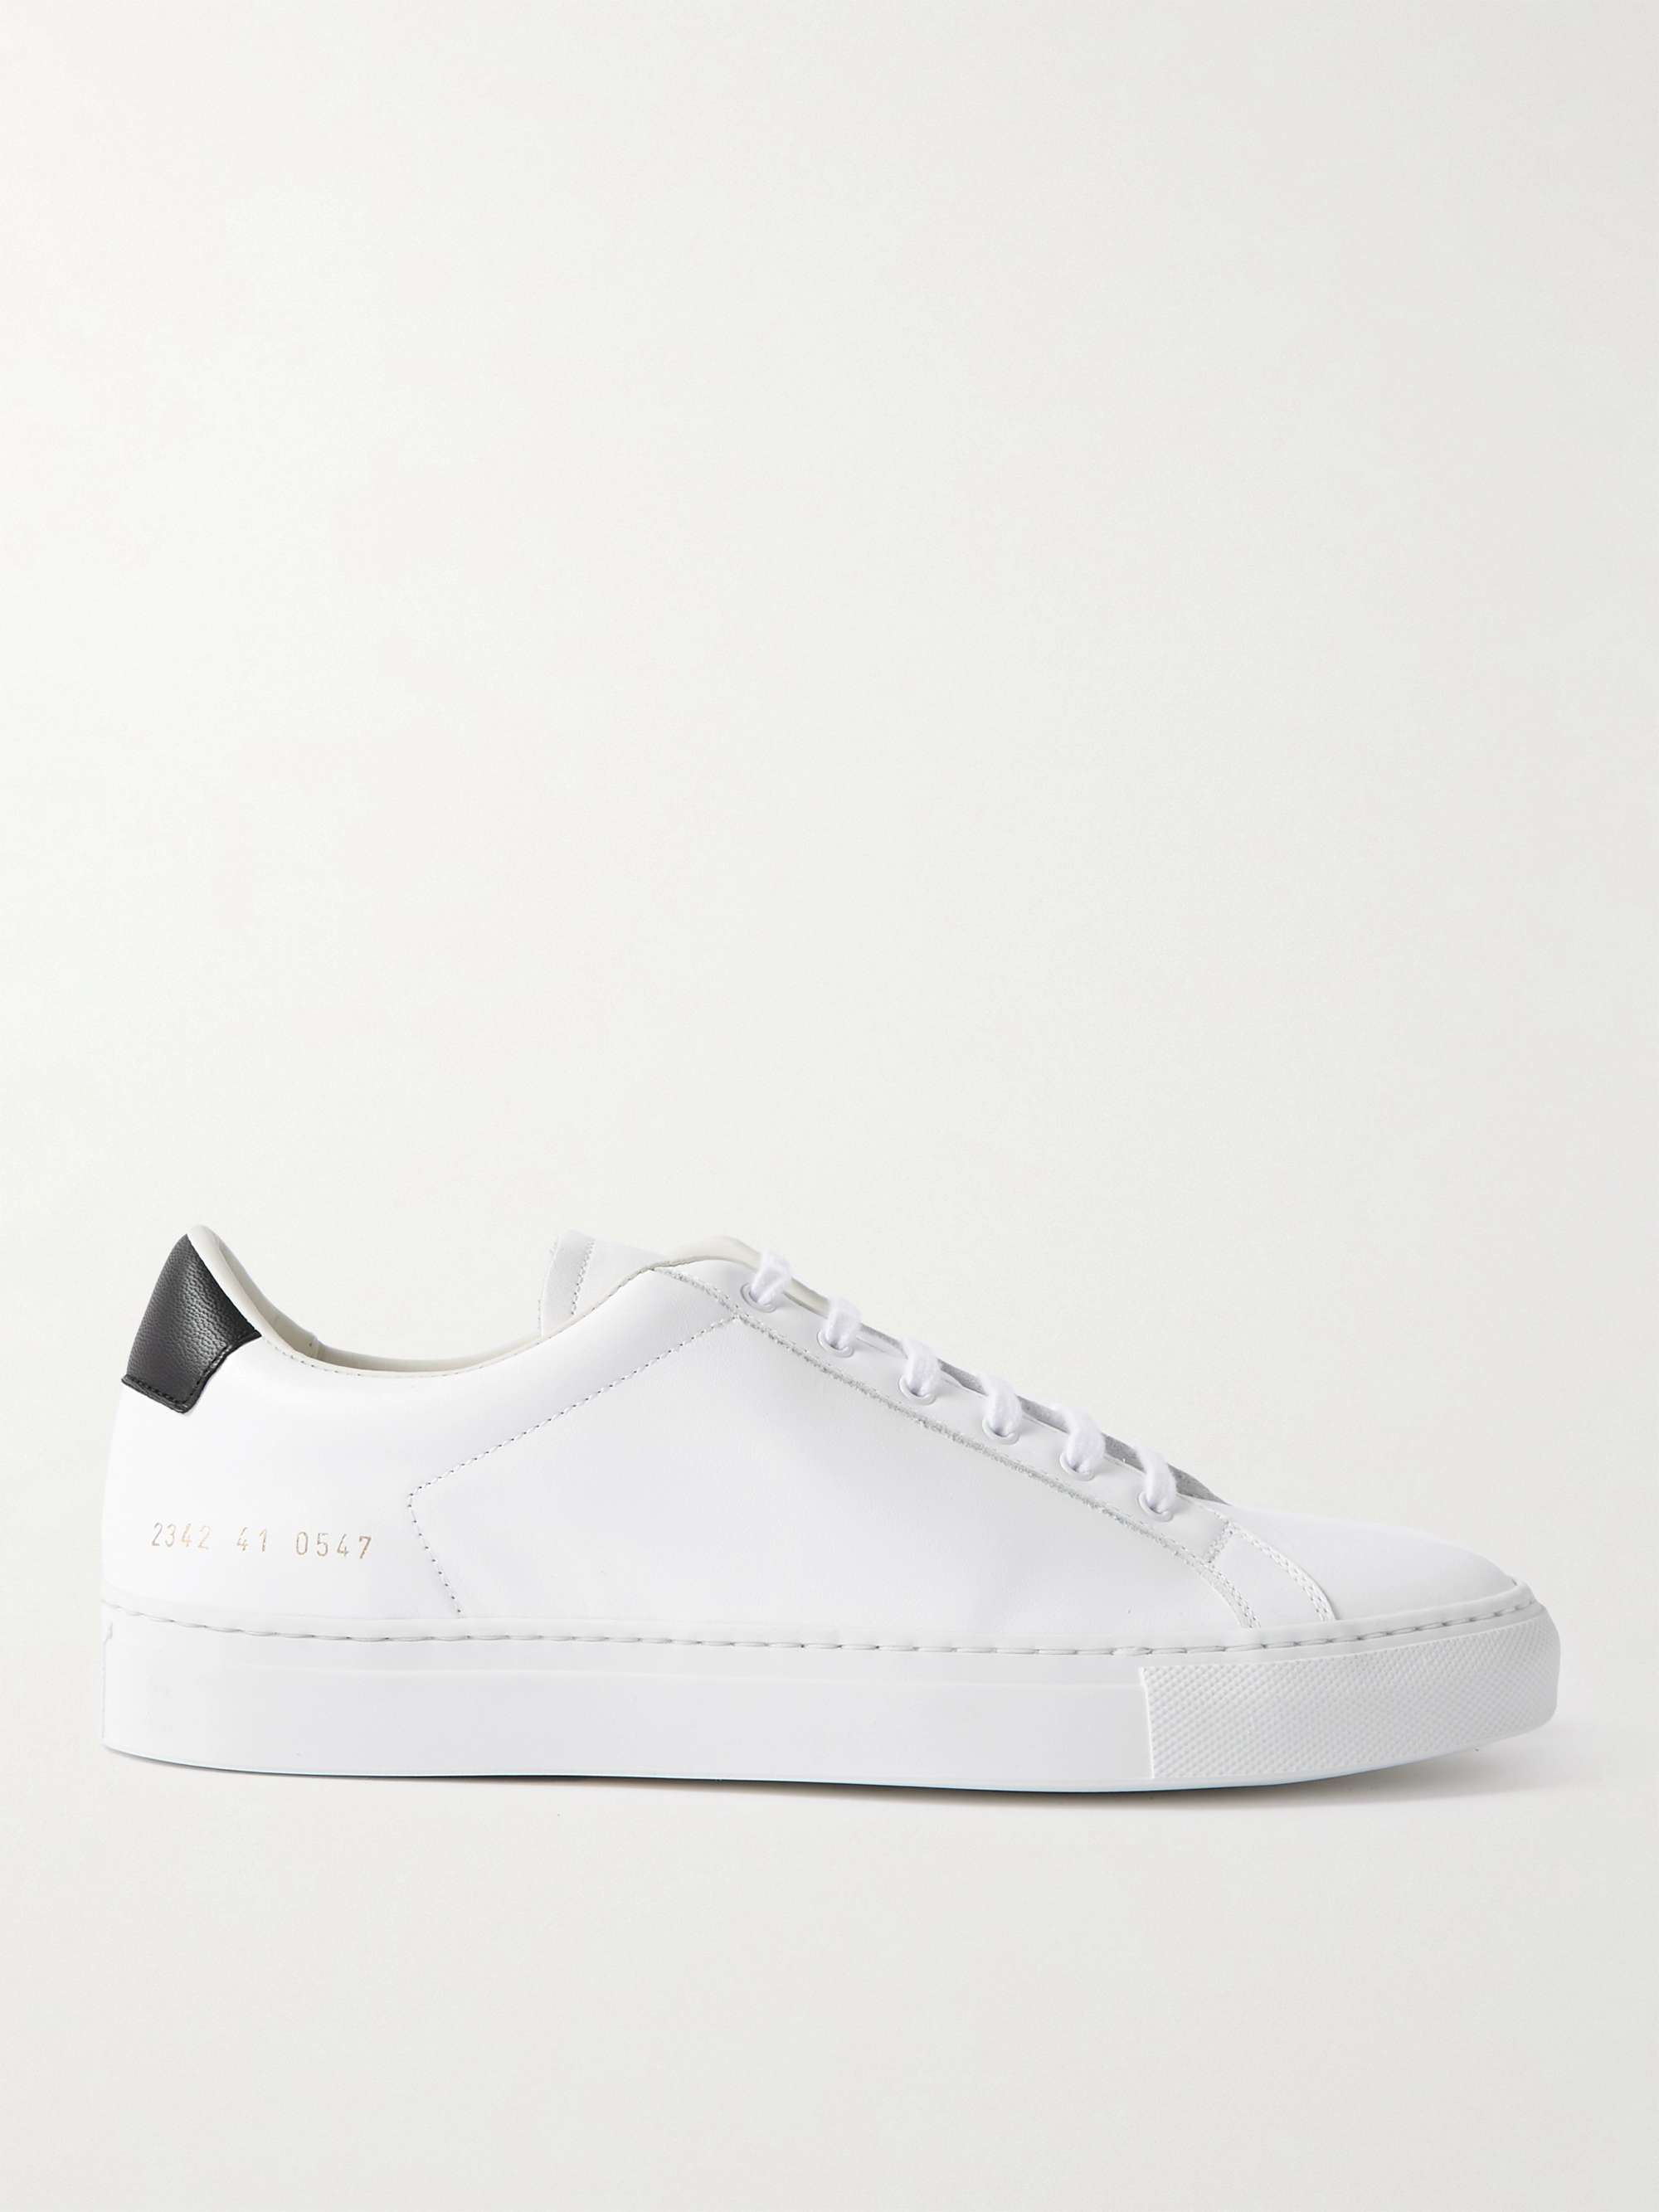 unhealthy Refusal Mathis White Retro Low Leather Sneakers | COMMON PROJECTS | MR PORTER